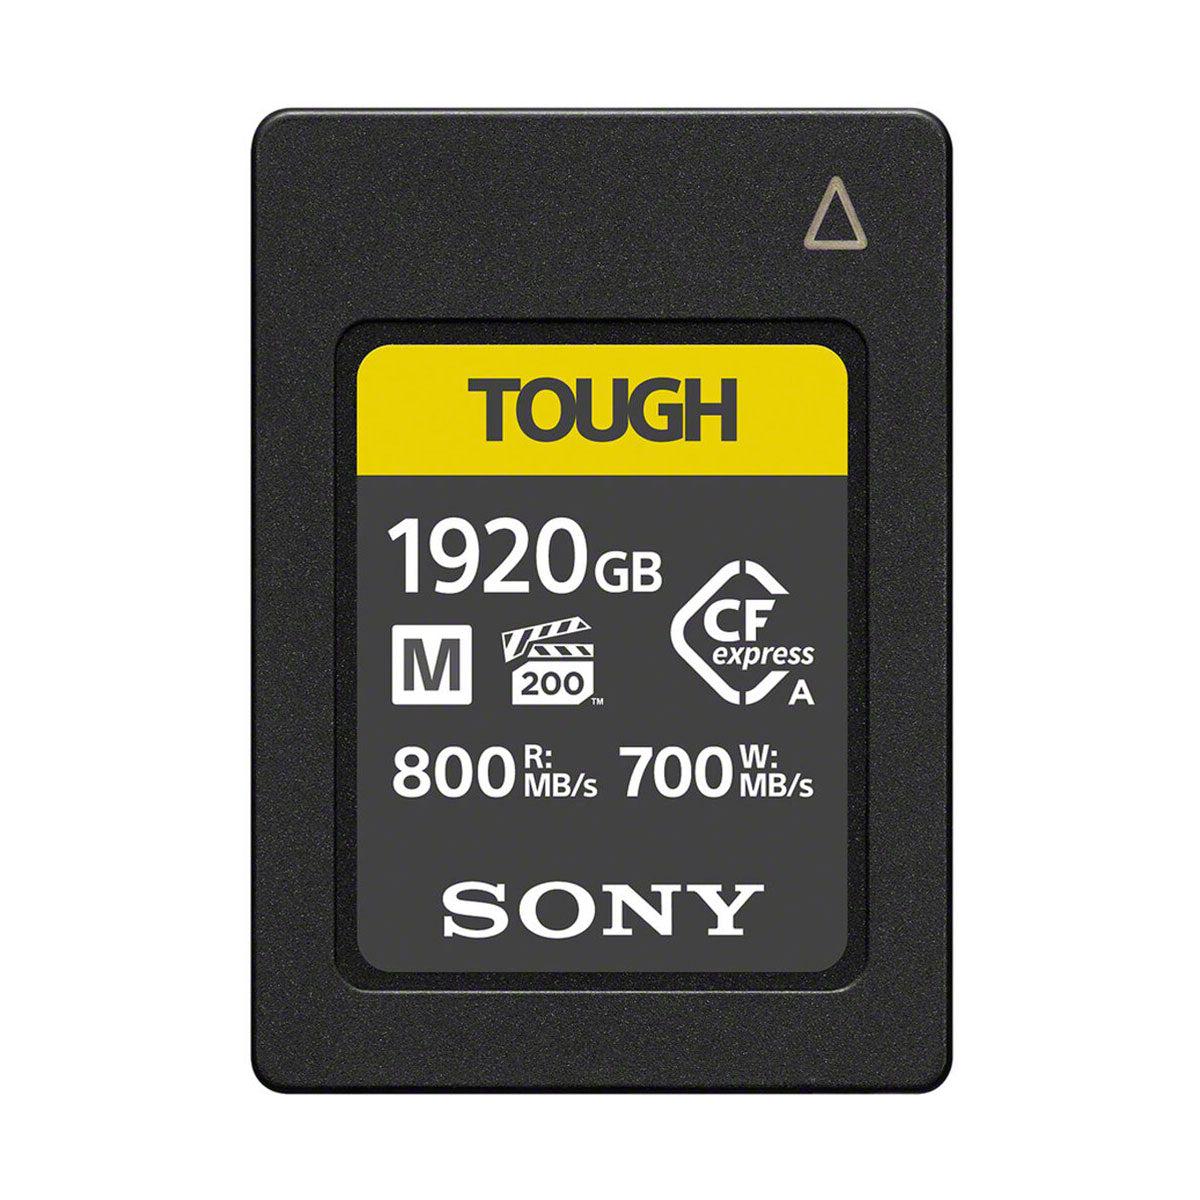 Sony 1920GB CFexpress Type A Memory Card (VPG 200)